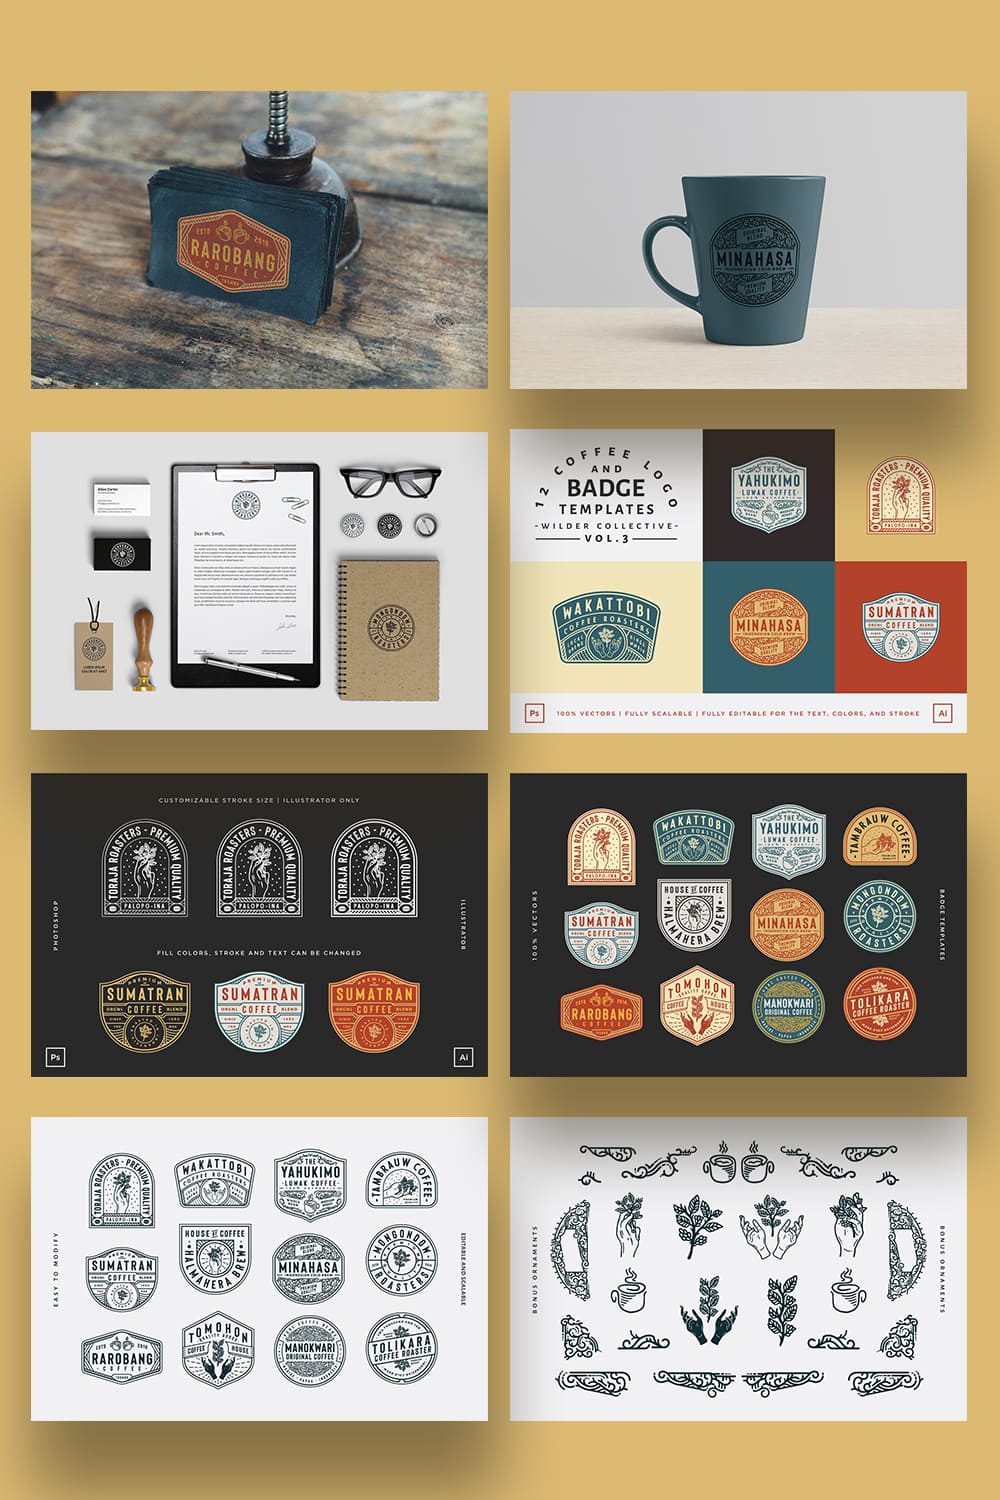 12 coffee logo and badge templates pinterest image.